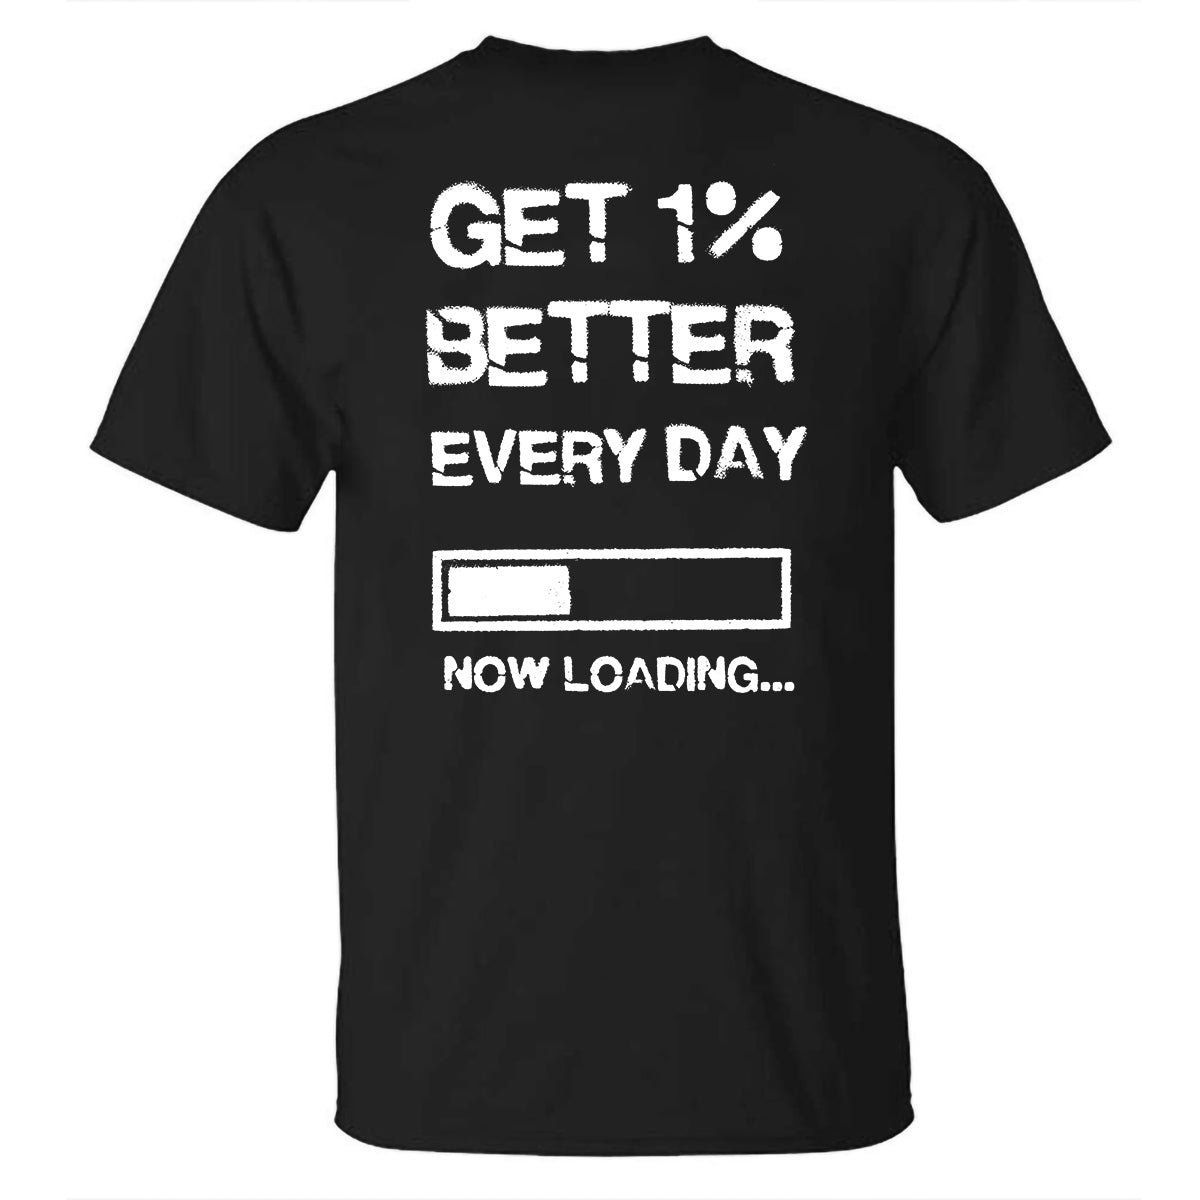 Get 1% Better Every Day Printed T-shirt